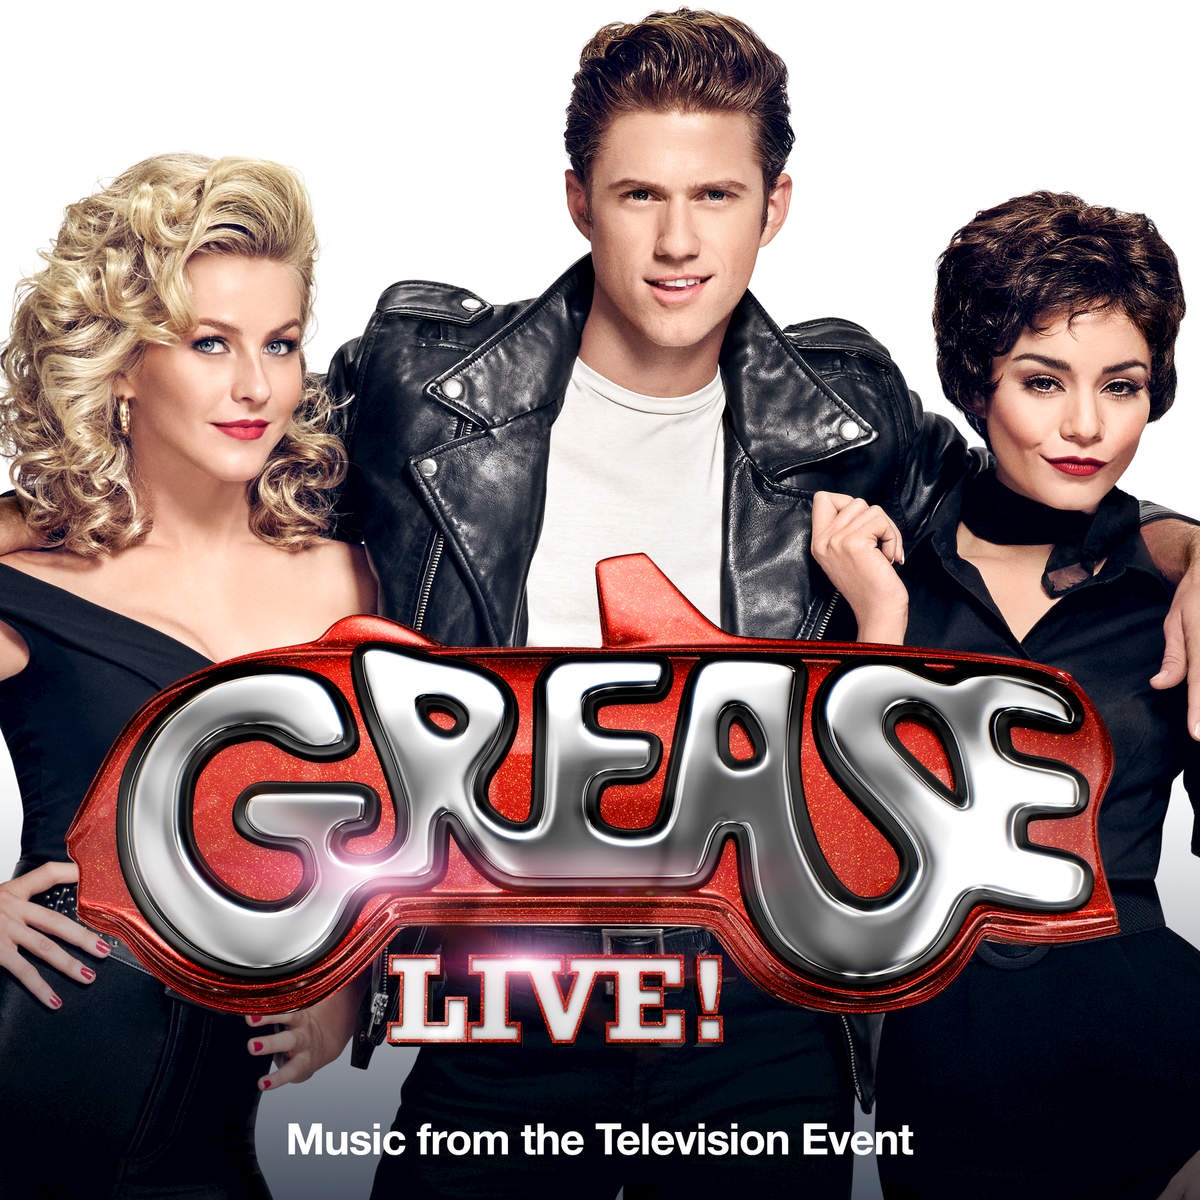 Greased Lightnin' - From "Grease Live!" Music From The Television Event